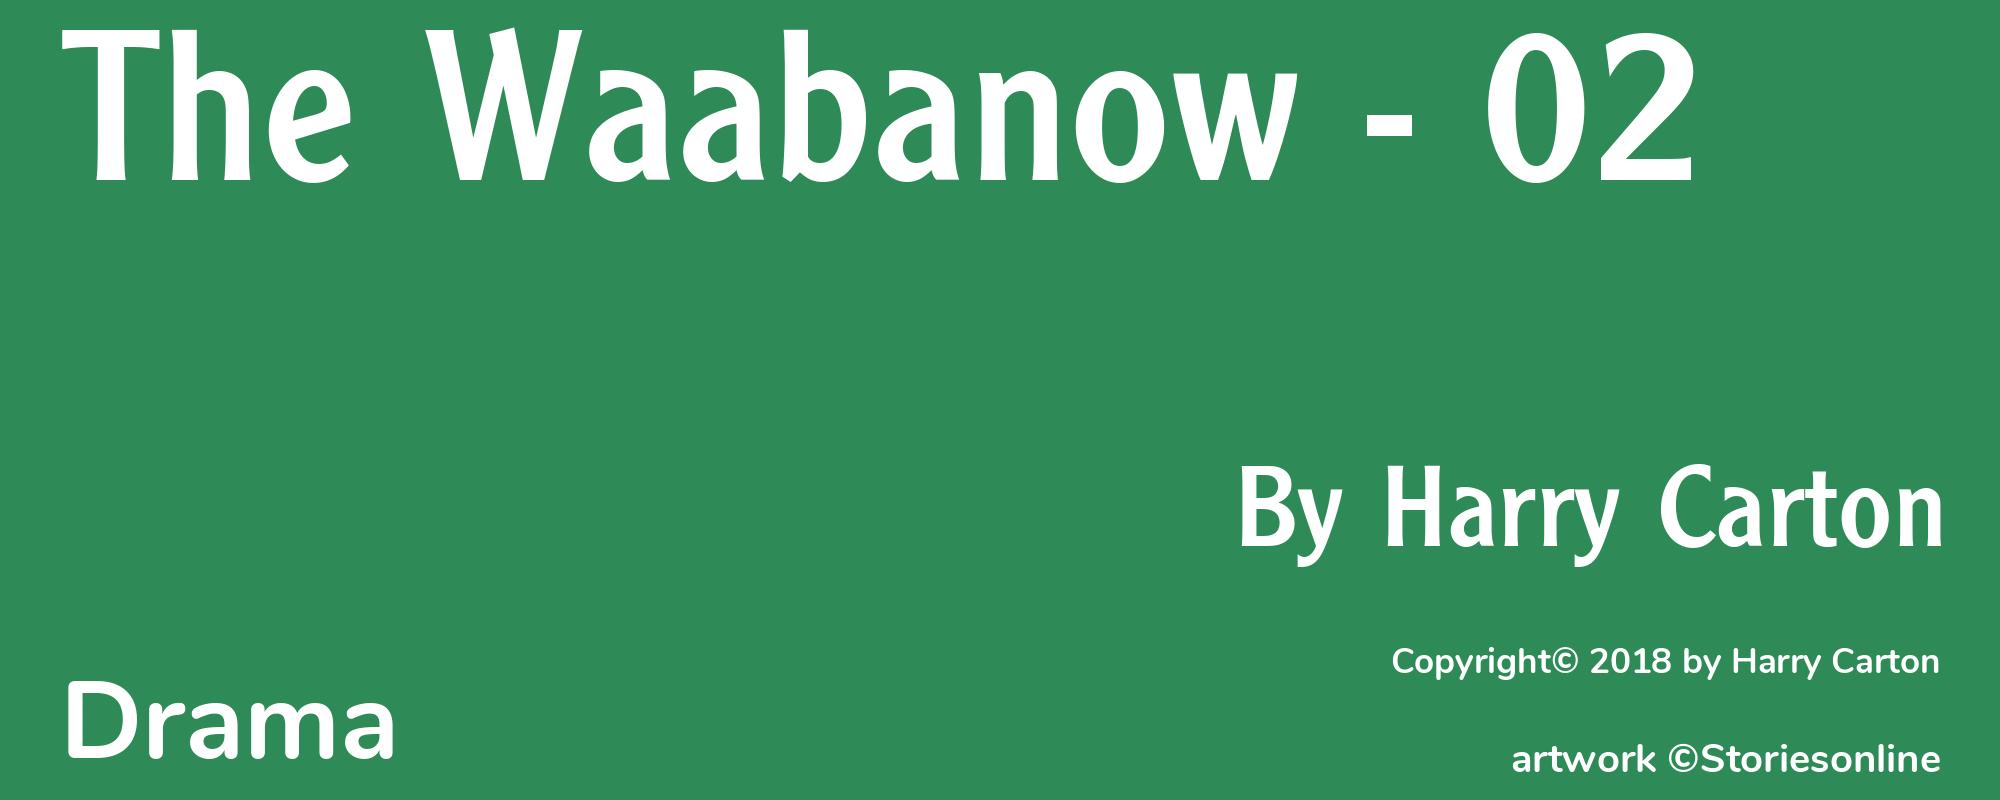 The Waabanow - 02 - Cover